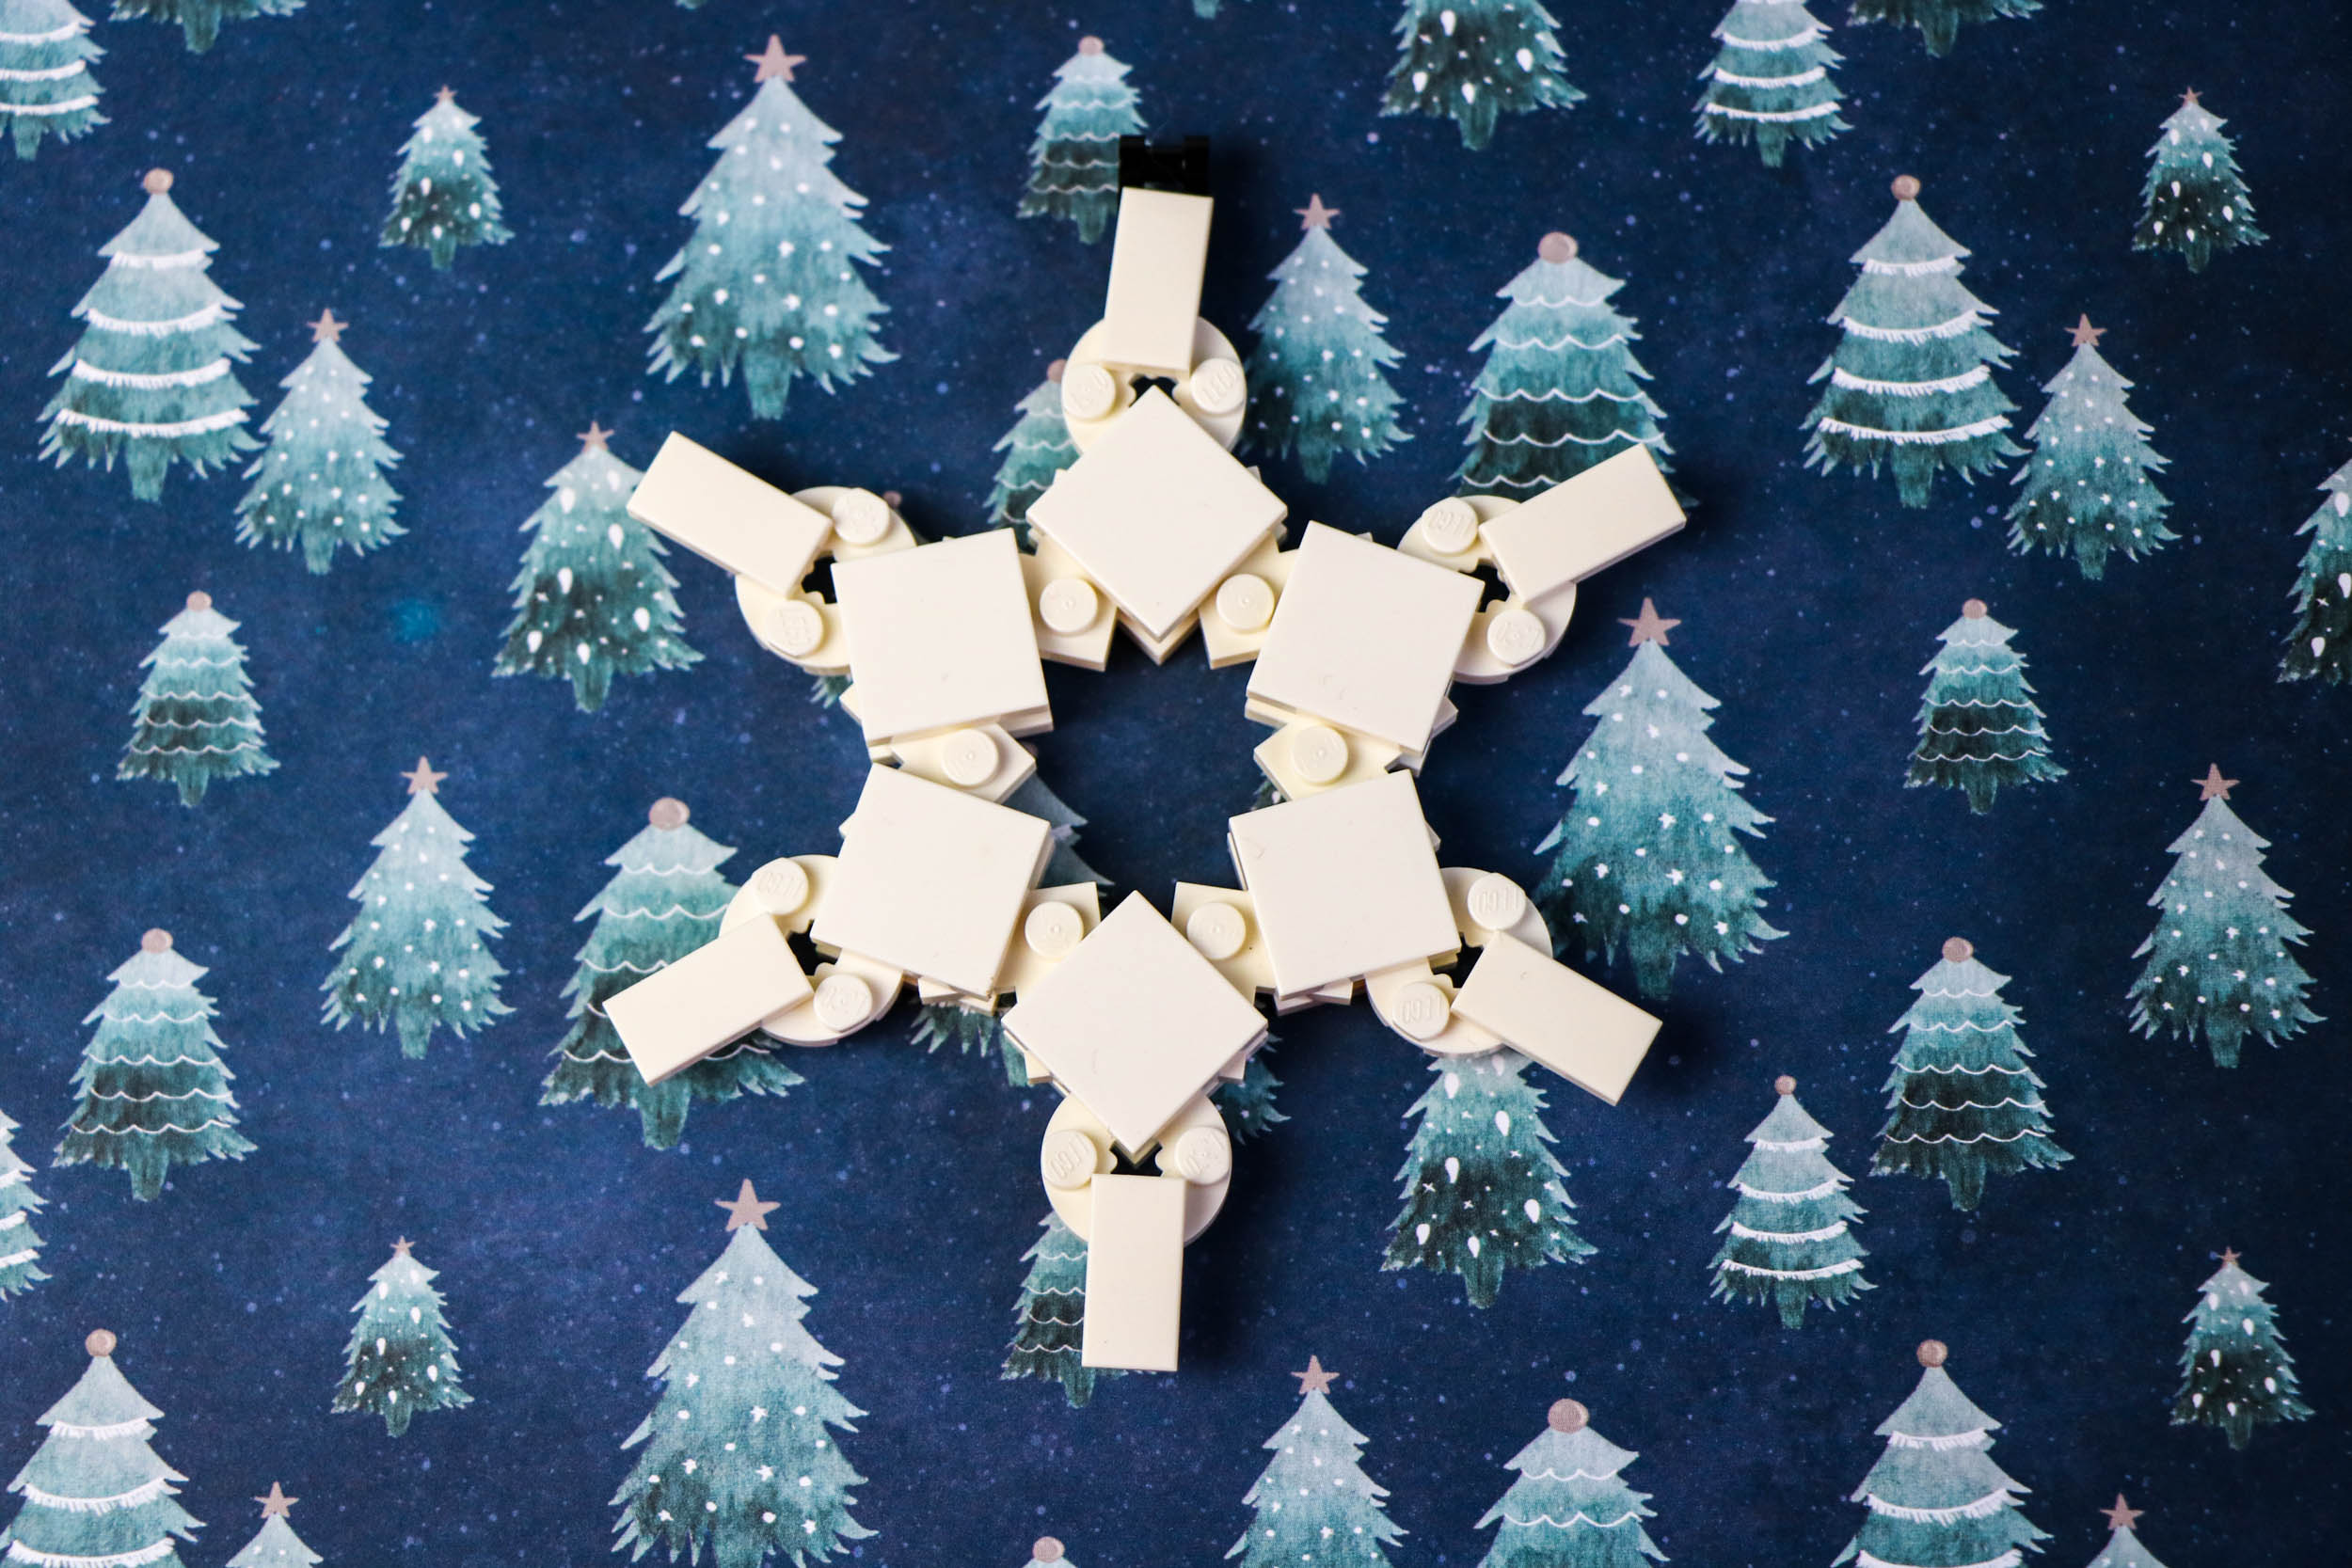 How to Build a Lego Snowflake Ornament